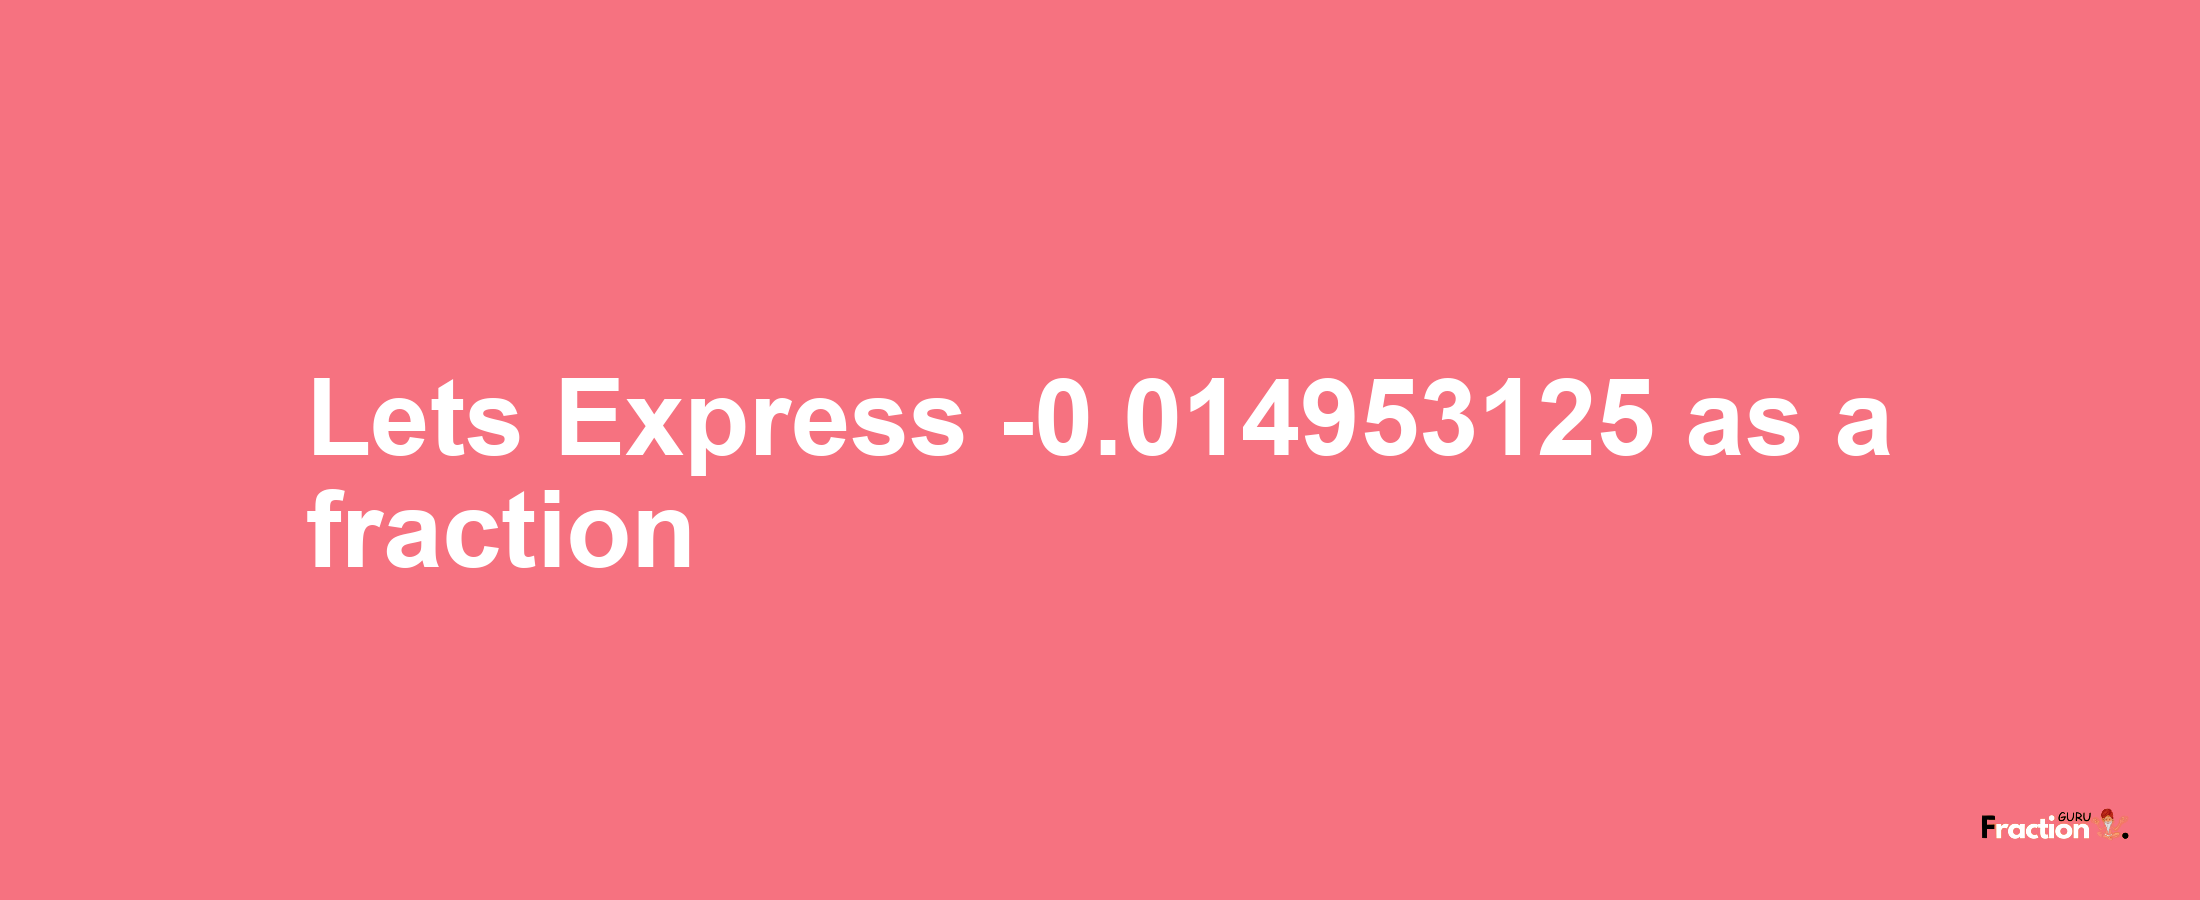 Lets Express -0.014953125 as afraction